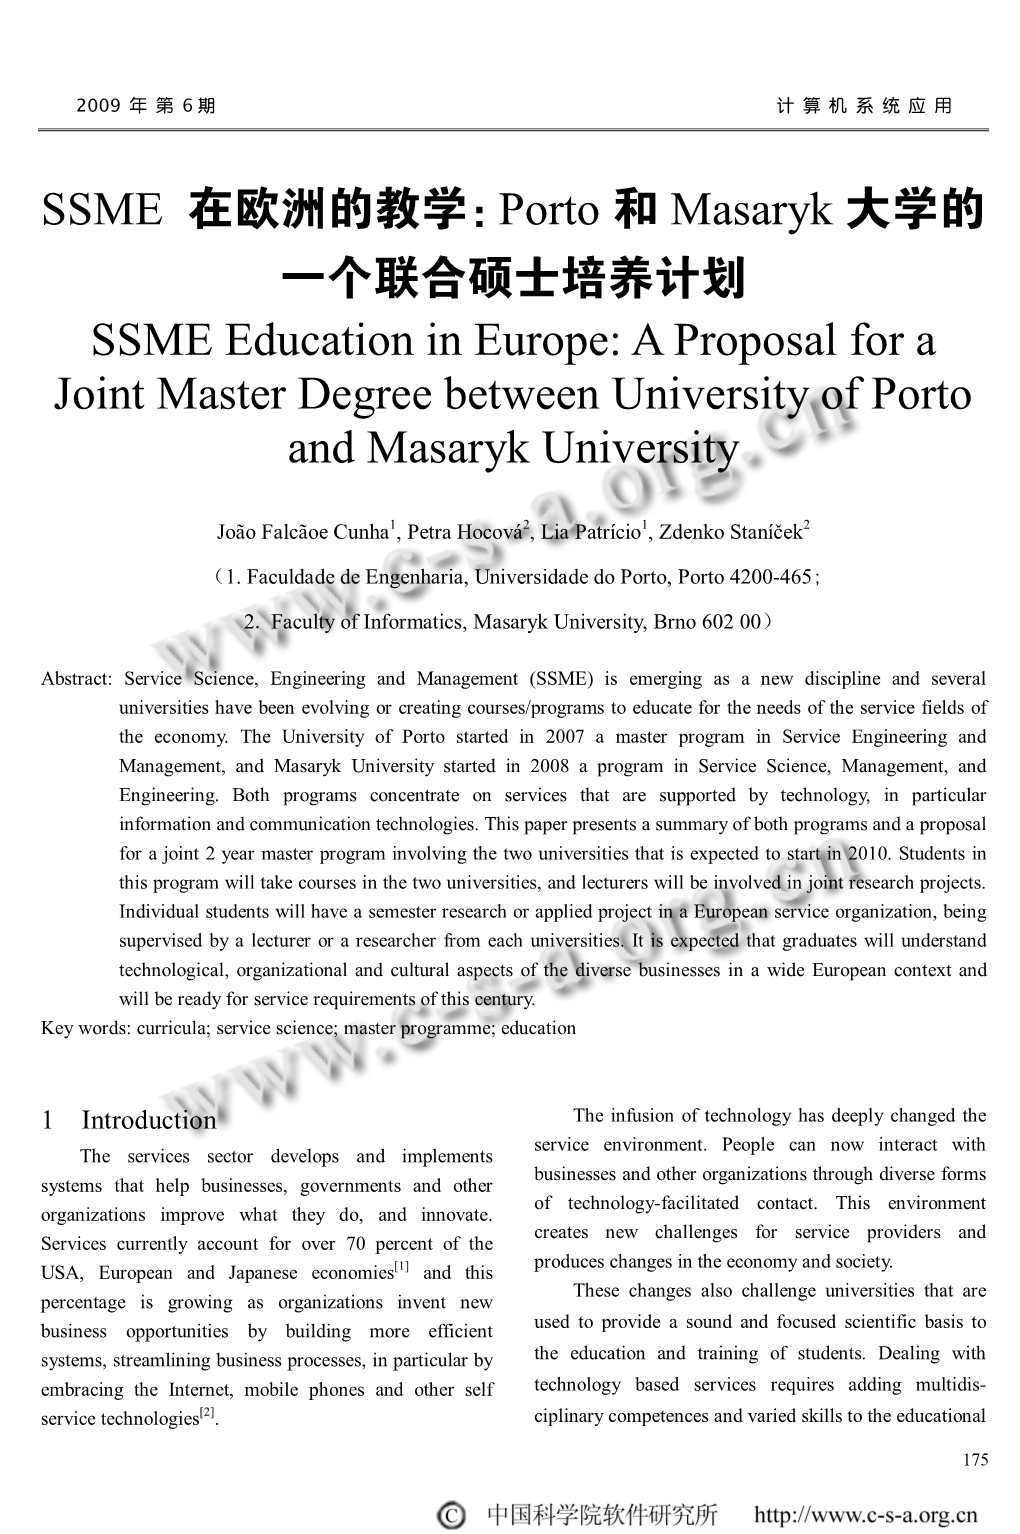 Porto 和 Masaryk 大学的 一个联合硕士培养计划 SSME Education in Europe: a Proposal for a Joint Master Degree Between University of Porto and Masaryk University